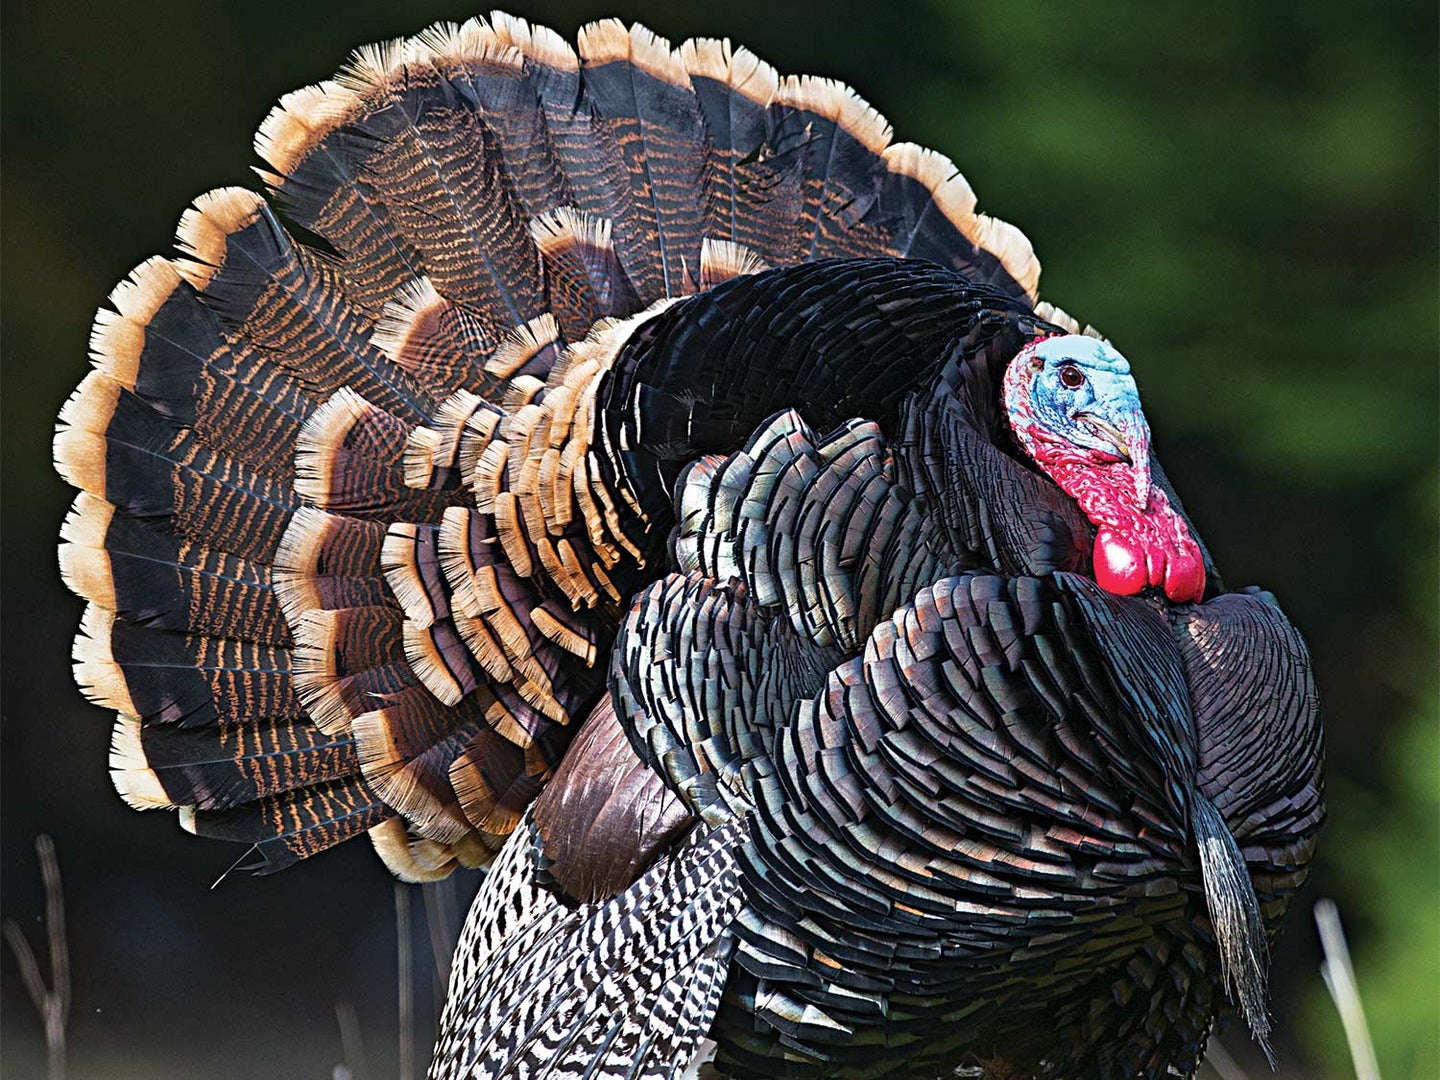 A Merriam’s gobbler stops to strut on his way to the call.